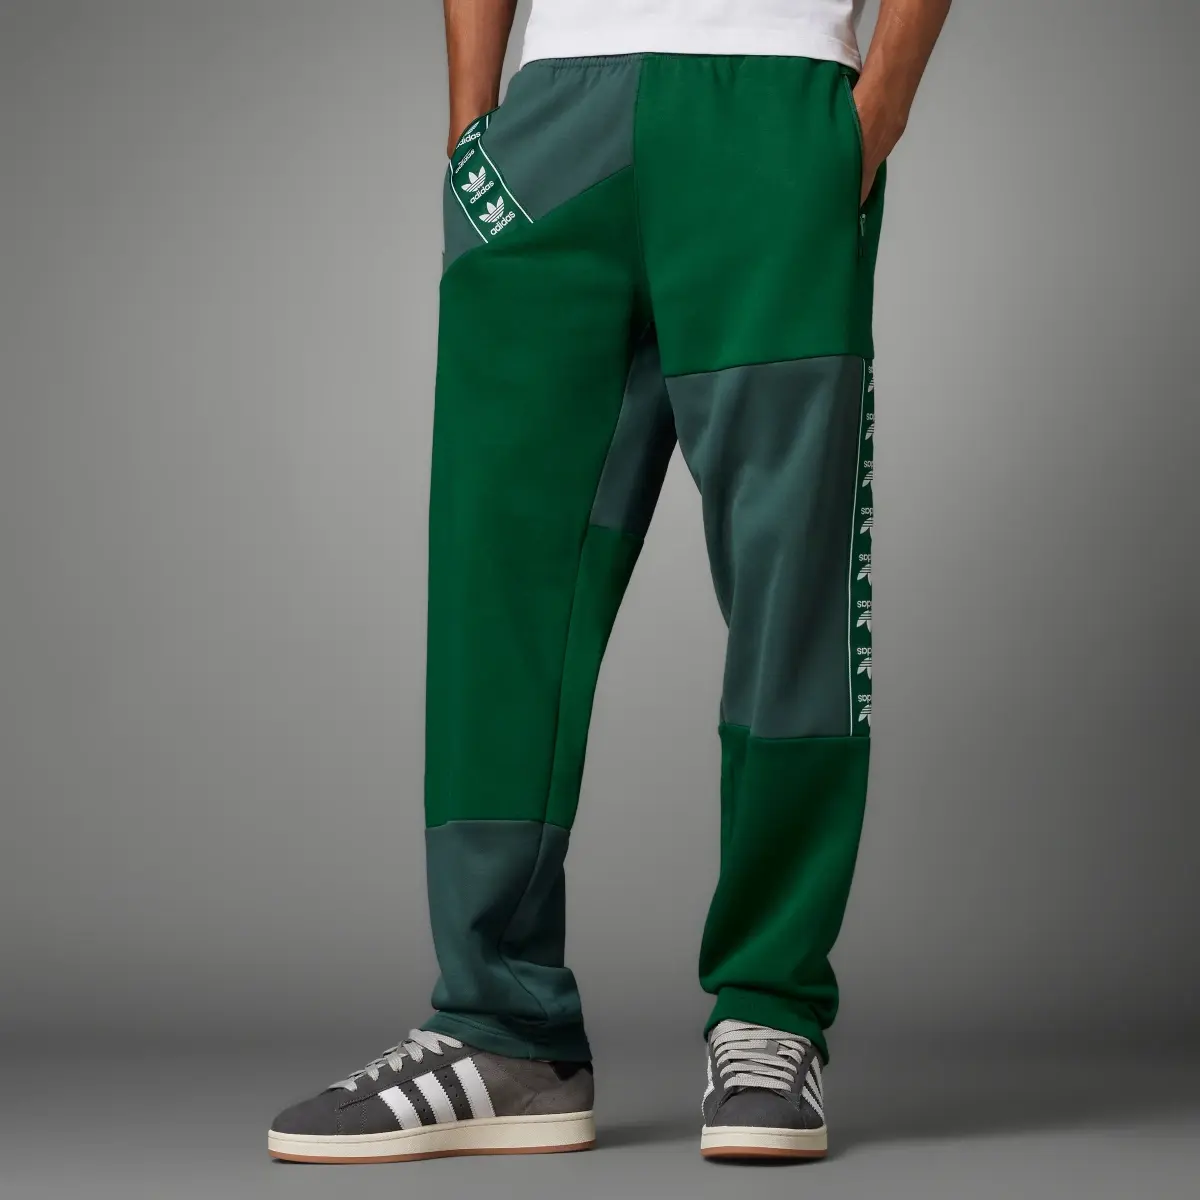 Adidas ADC Patchwork FB Track Pants. 1